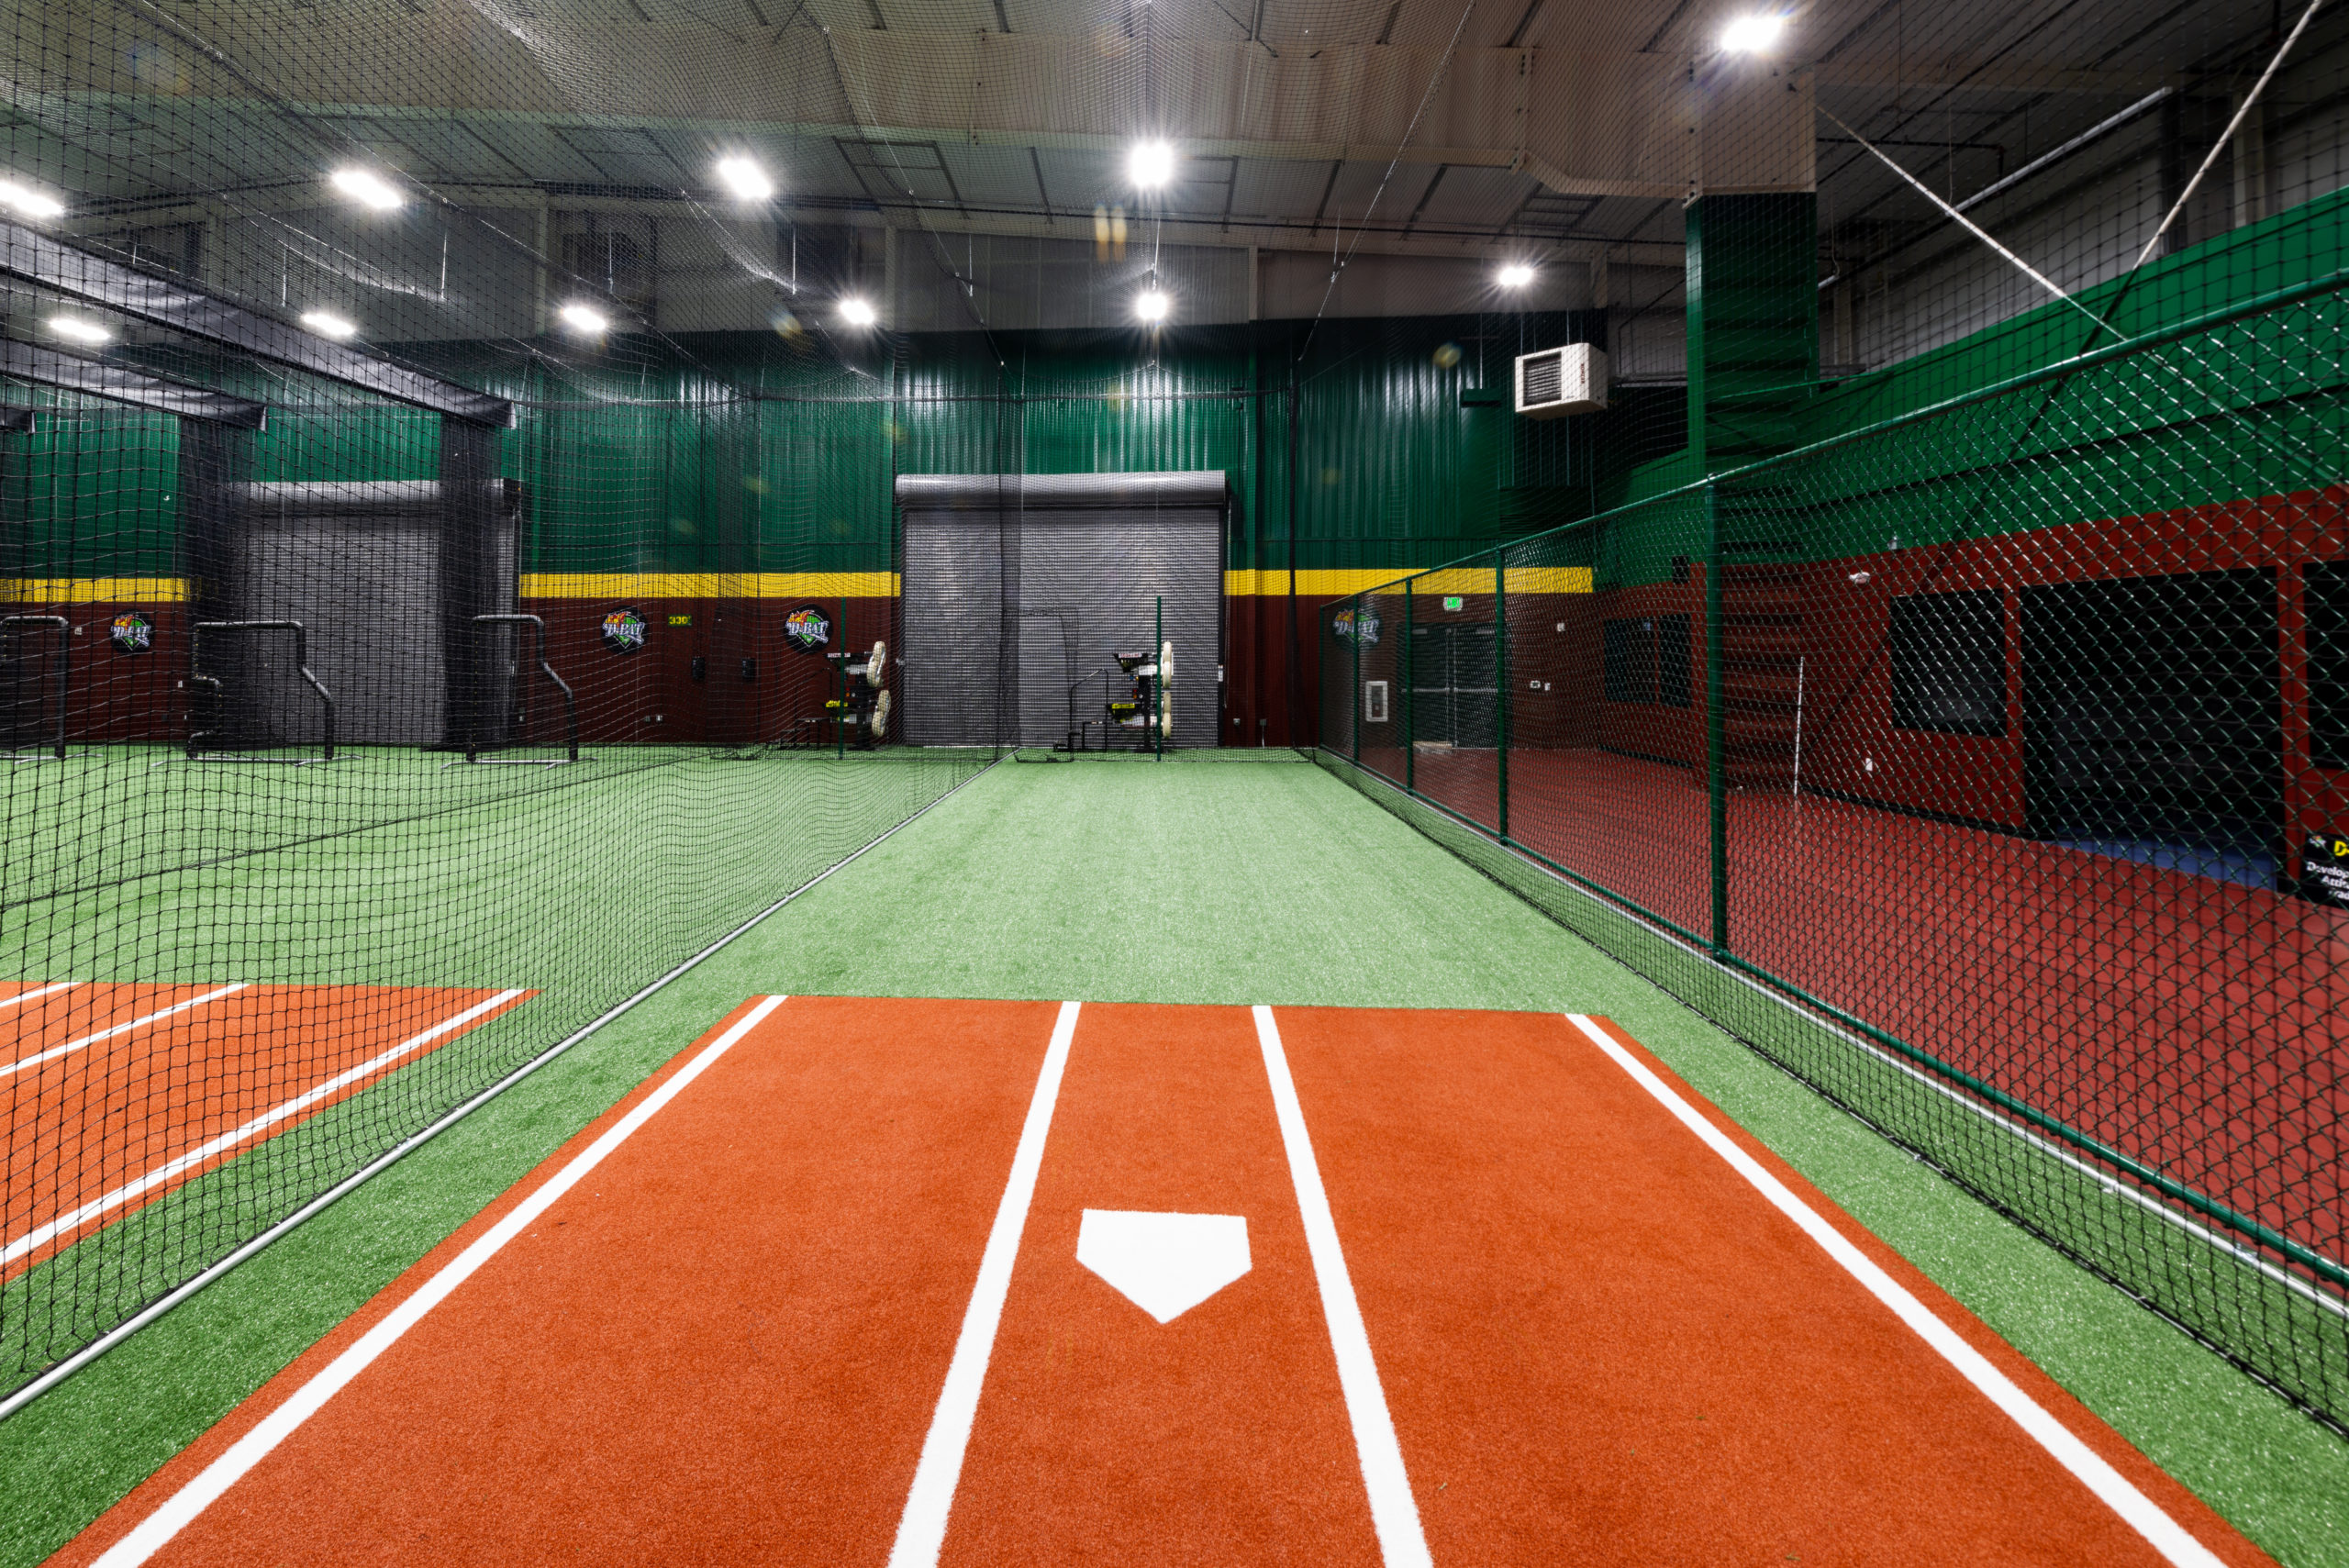 D-Bat View of plate and batting cage